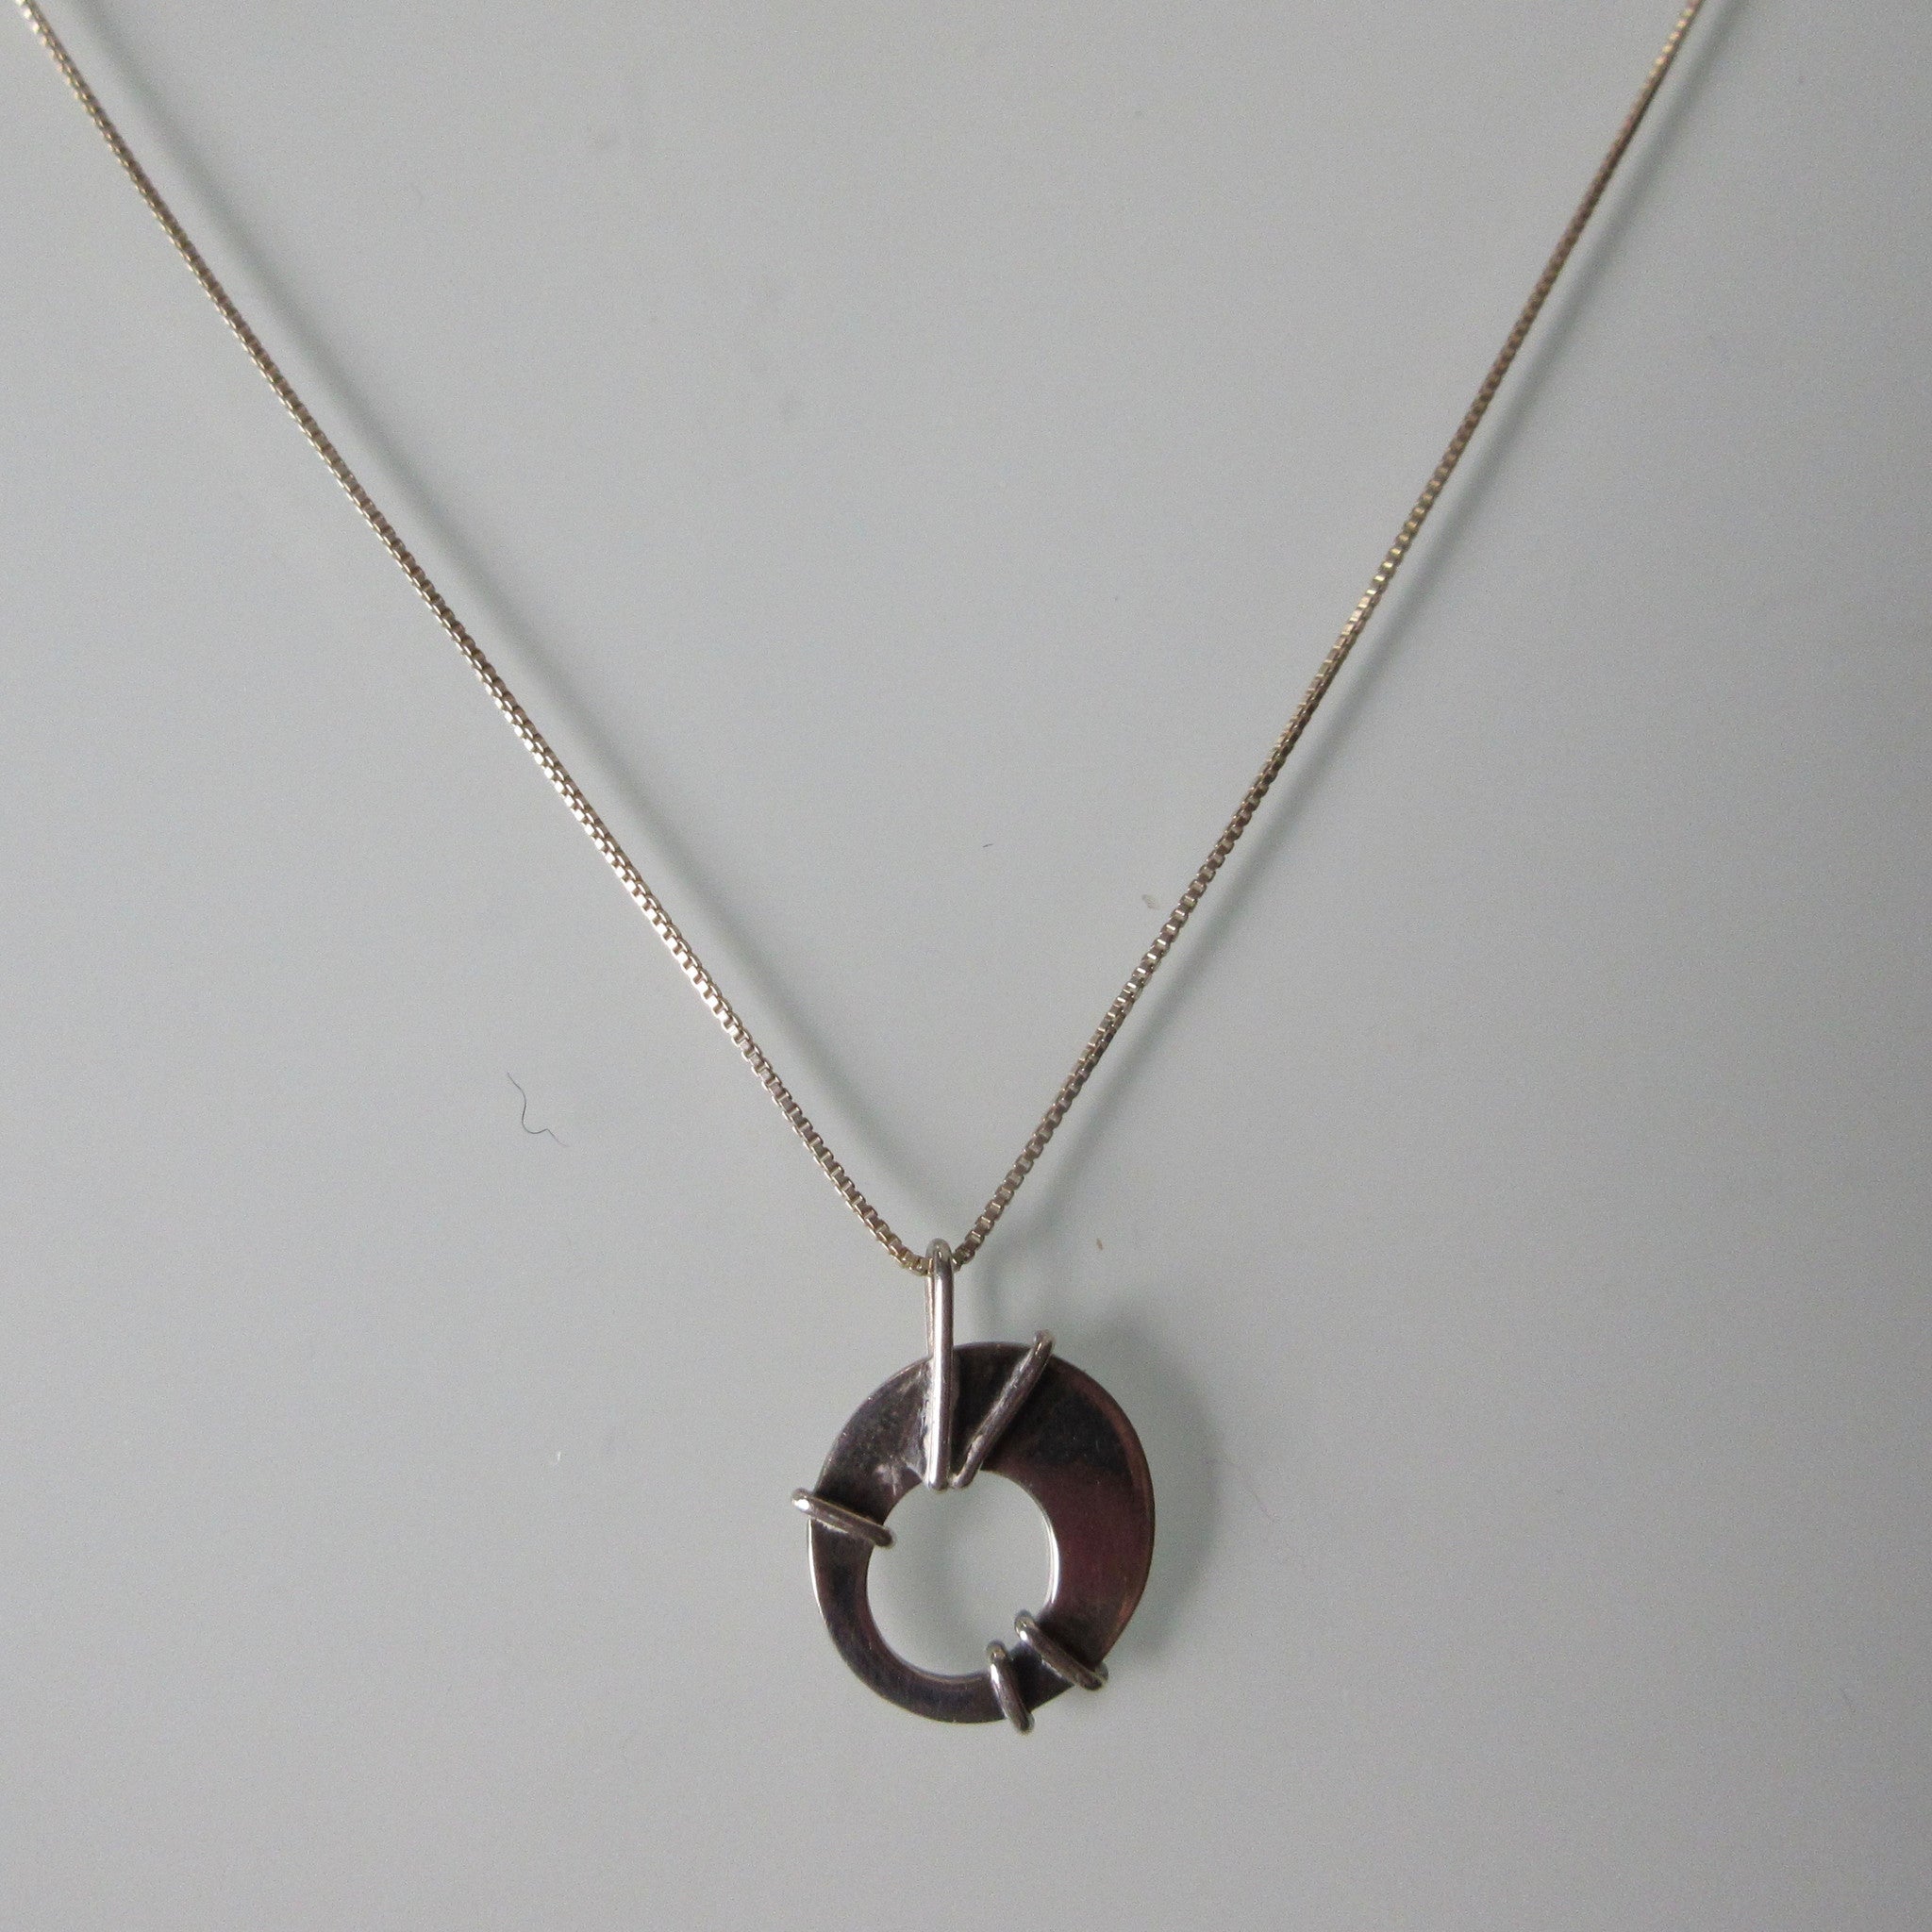 Contemporary Pendant on new Sterling Silver Chain 18"